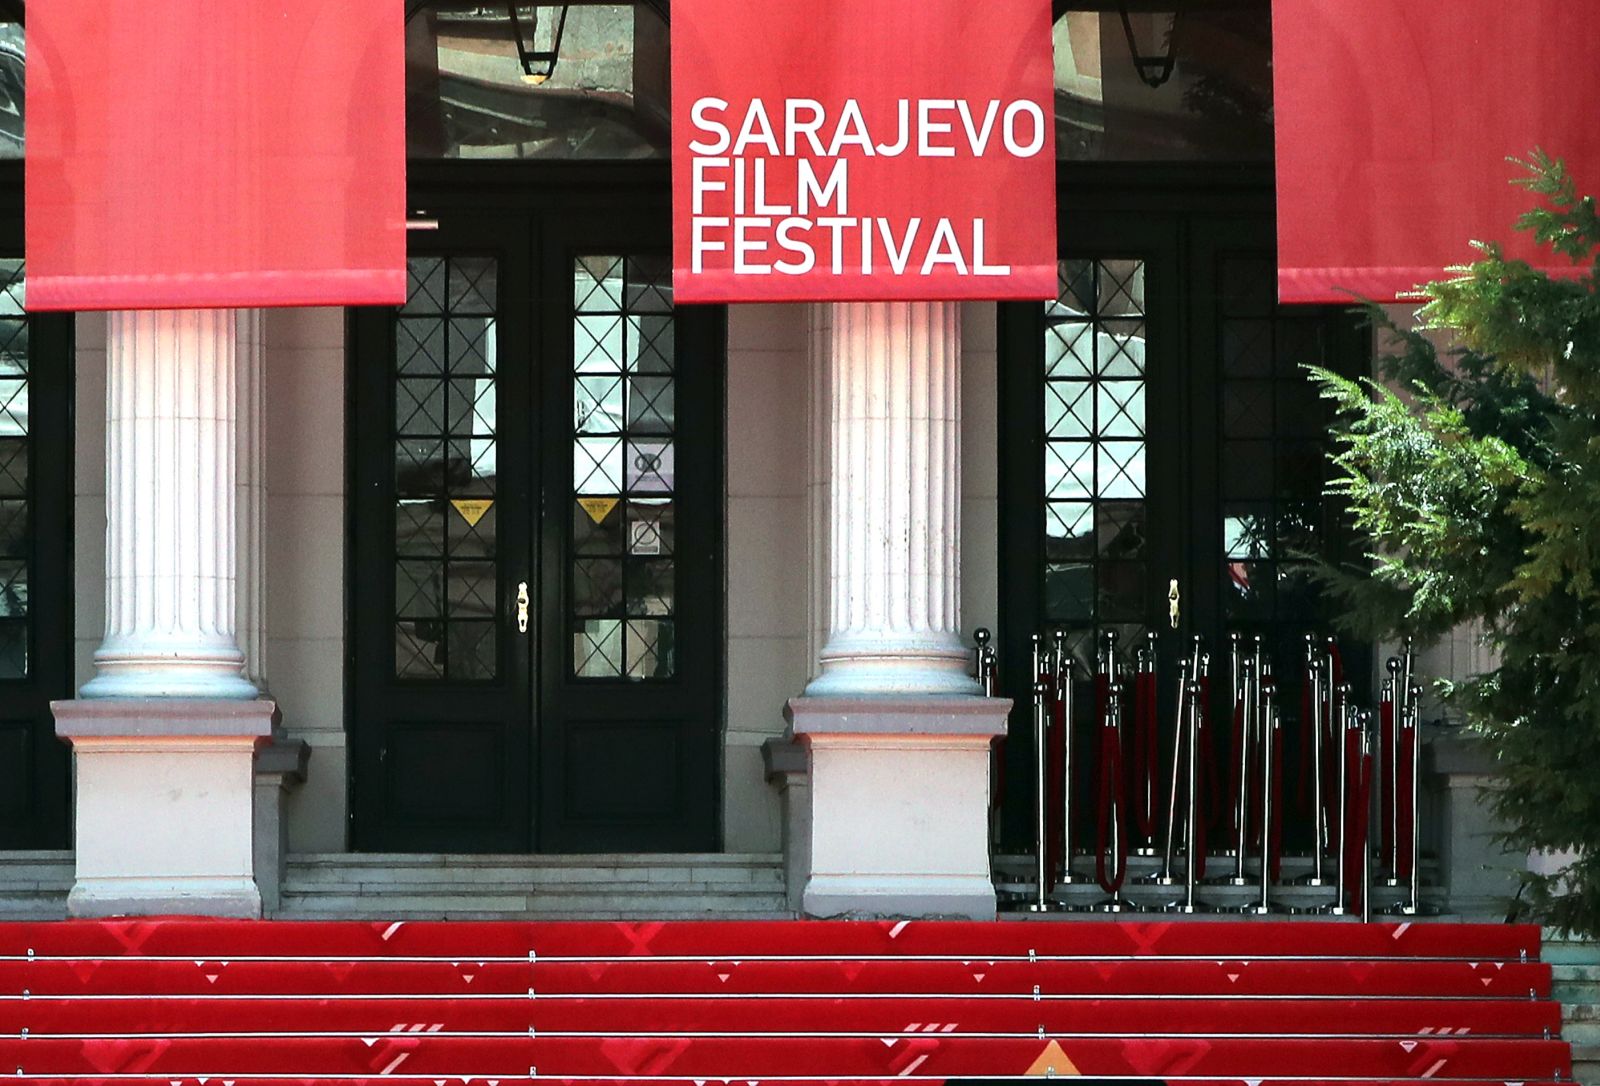 epa09412433 The red carpet is ready for guests of the 27th Sarajevo Film Festival, in Sarajevo, Bosnia and Herzegovina, 13 August 2021. The 27th Sarajevo Film Festival, which runs from 13 to 20 August 2021, will present 48 films in competition for the Heart of Sarajevo awards.  EPA/FEHIM DEMIR